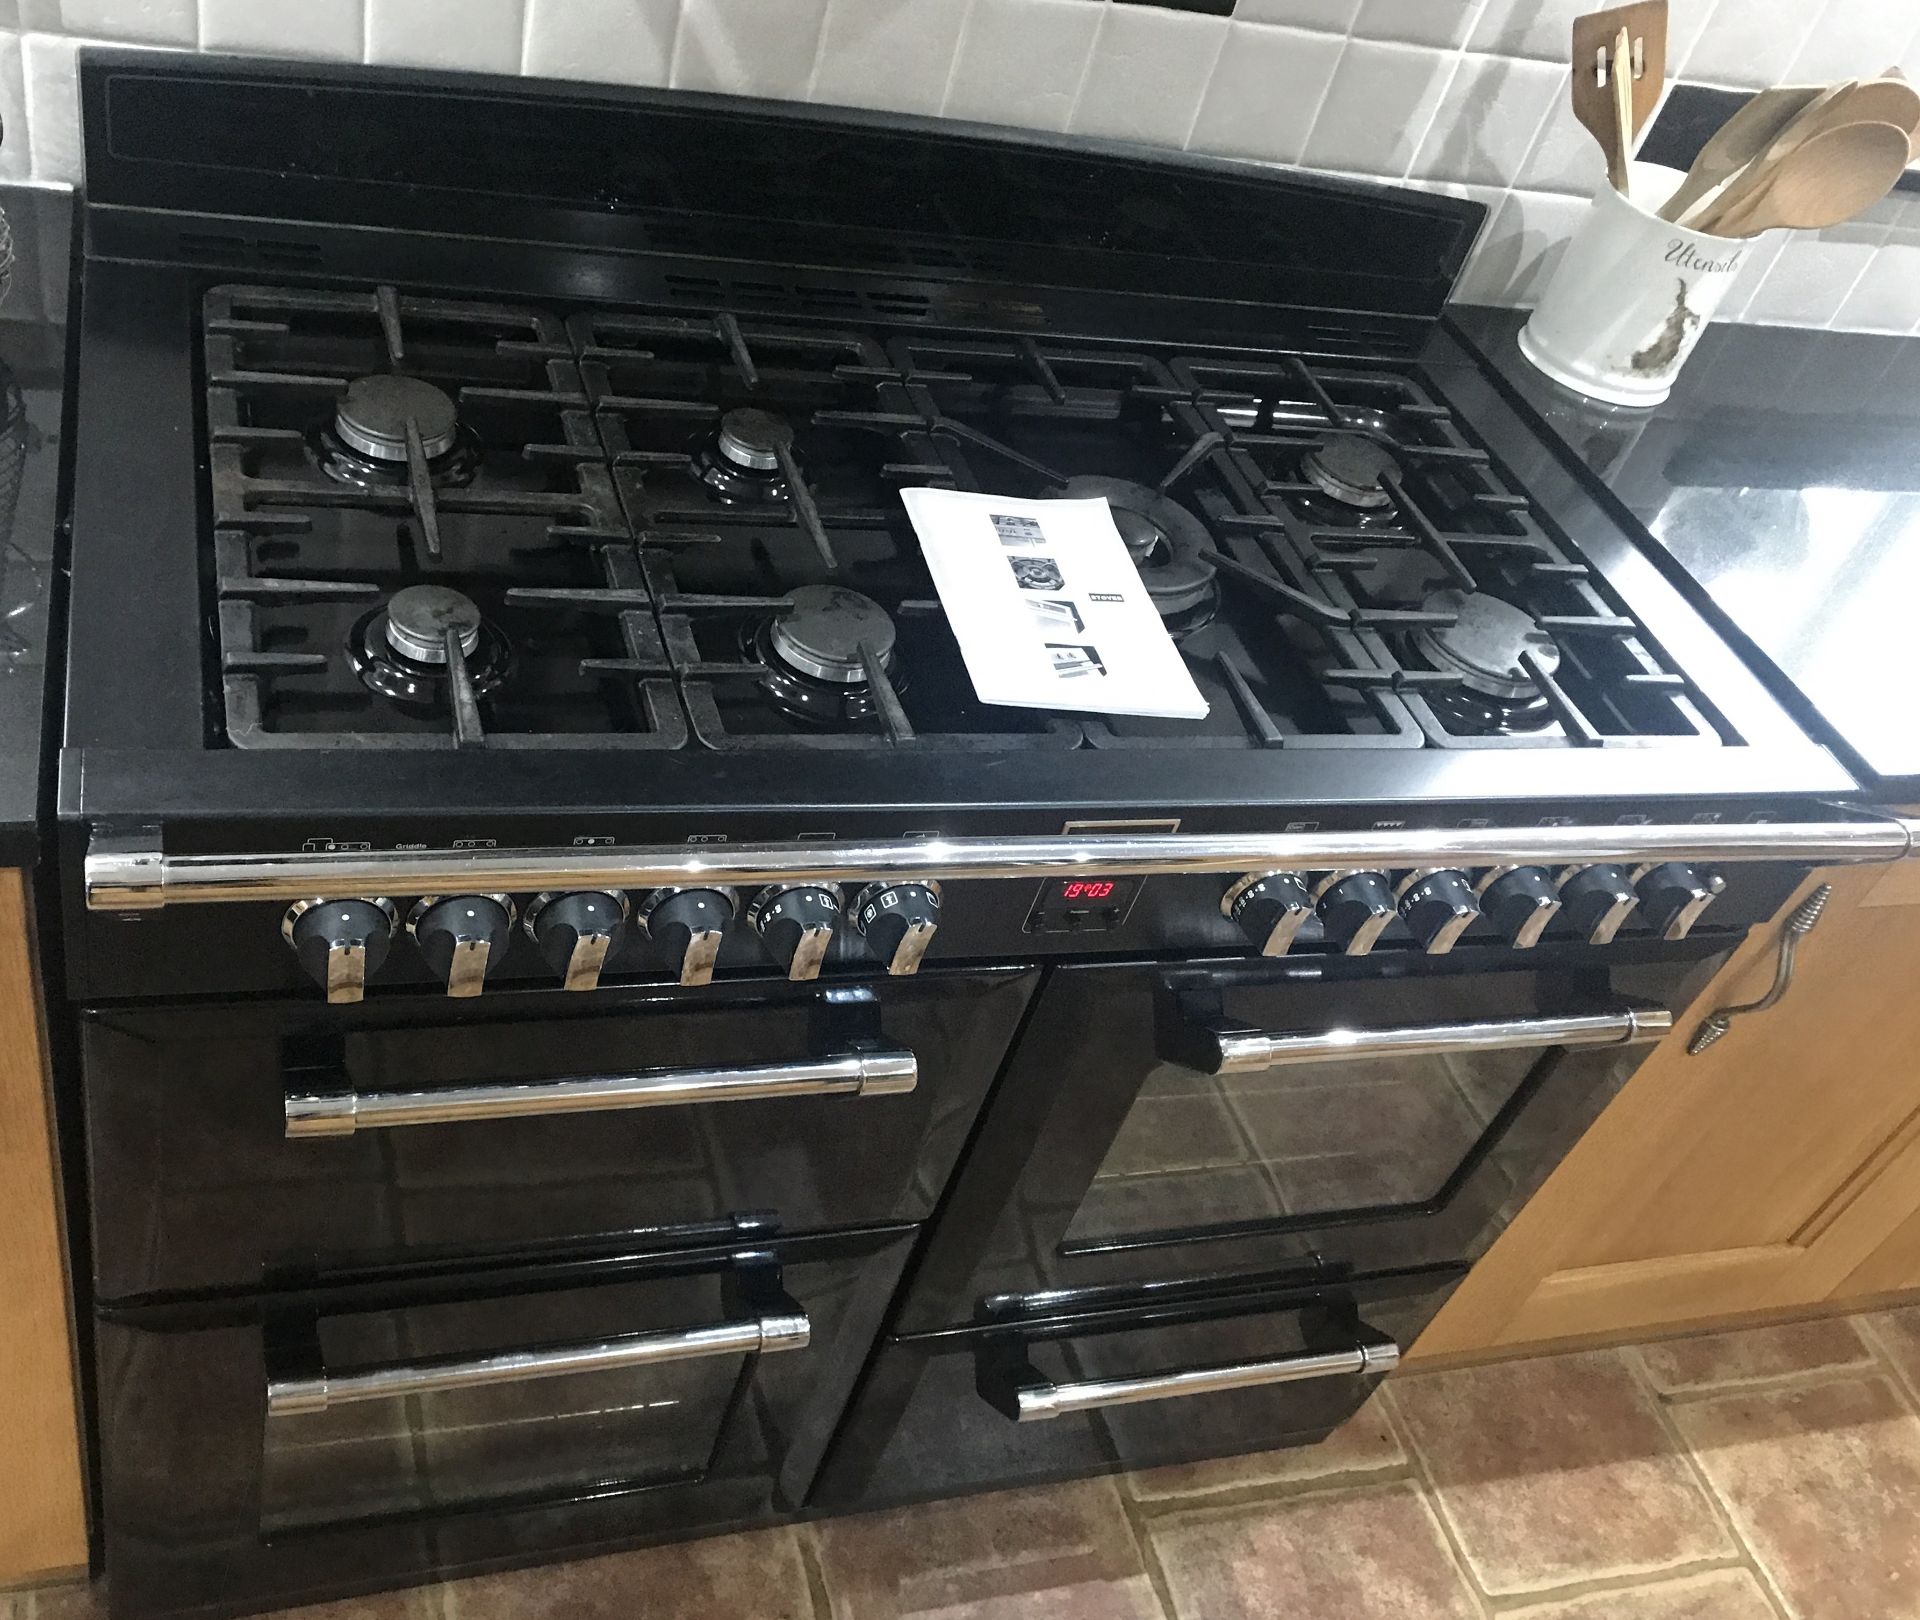 1 x Stoves Richmond 1100DF Dual Fuel Range Cooker With Matching Extractor Hood - Black Finish With 4 - Image 3 of 18